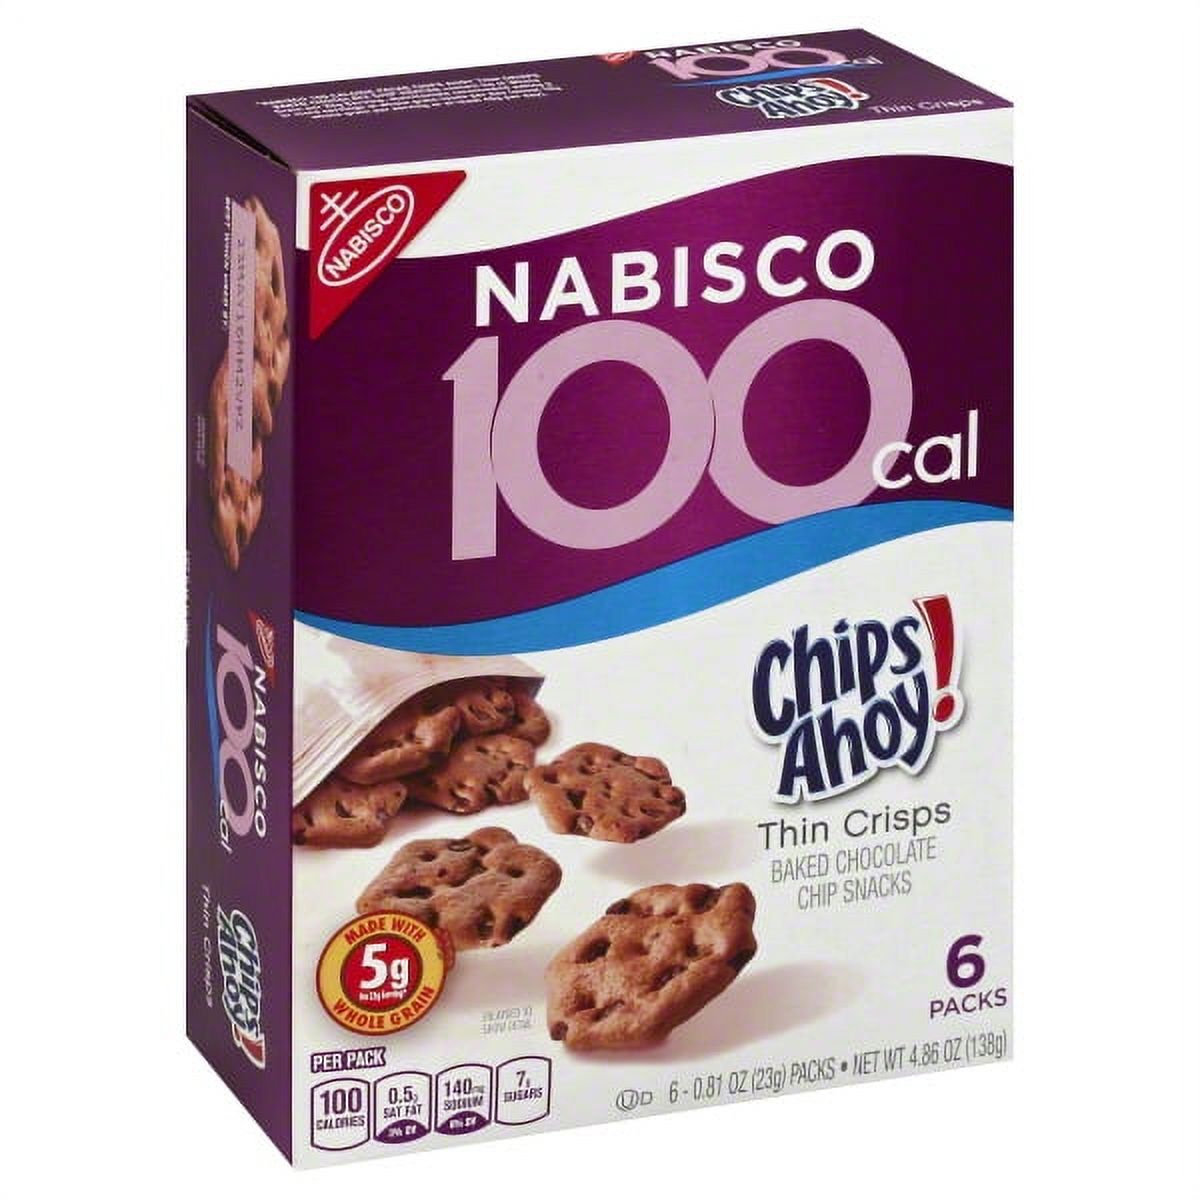 Nabisco 100 Calorie Packs Chips Ahoy! Baked Chocolate Chip Snack, 0.81 Oz., 6 Count - image 1 of 2